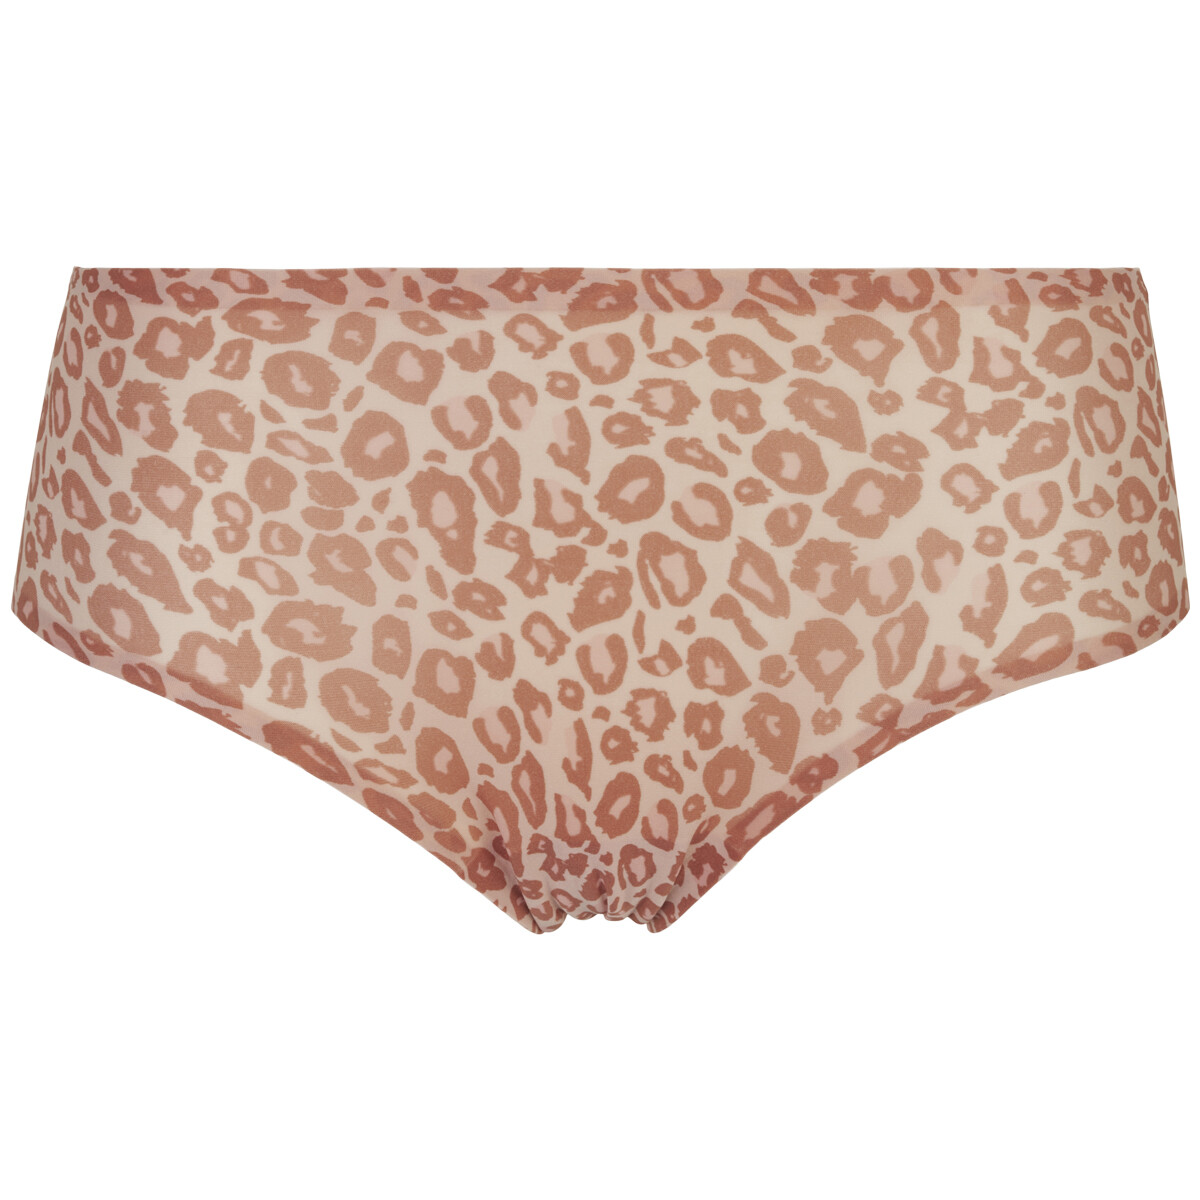 CHANTELLE SOFT STRETCH HIPSTER, BEIGE / NUDE